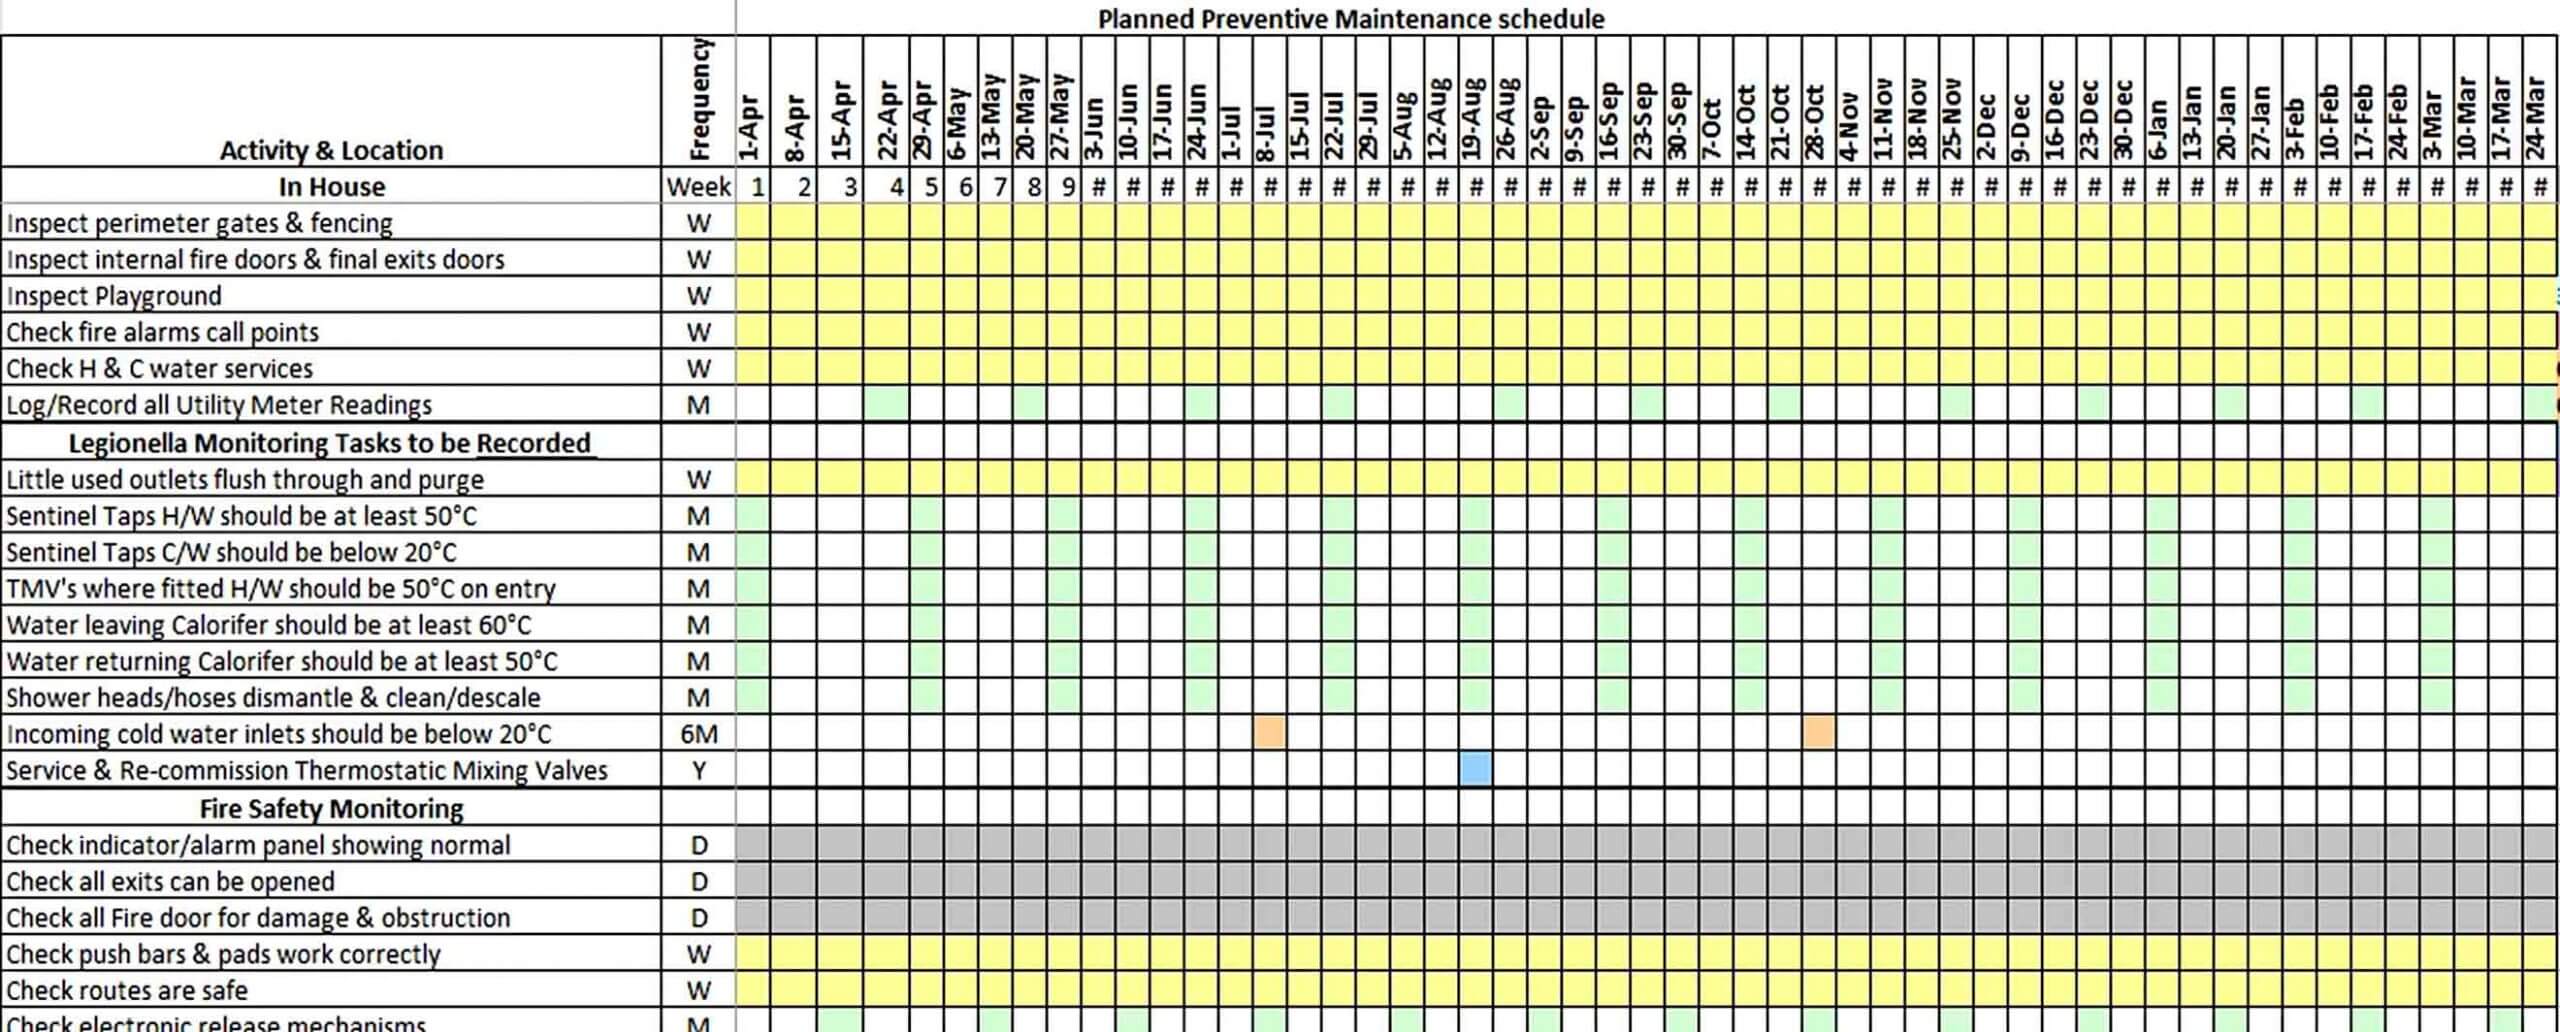 Planned Preventive Maintenance Schedule Template Excel Download